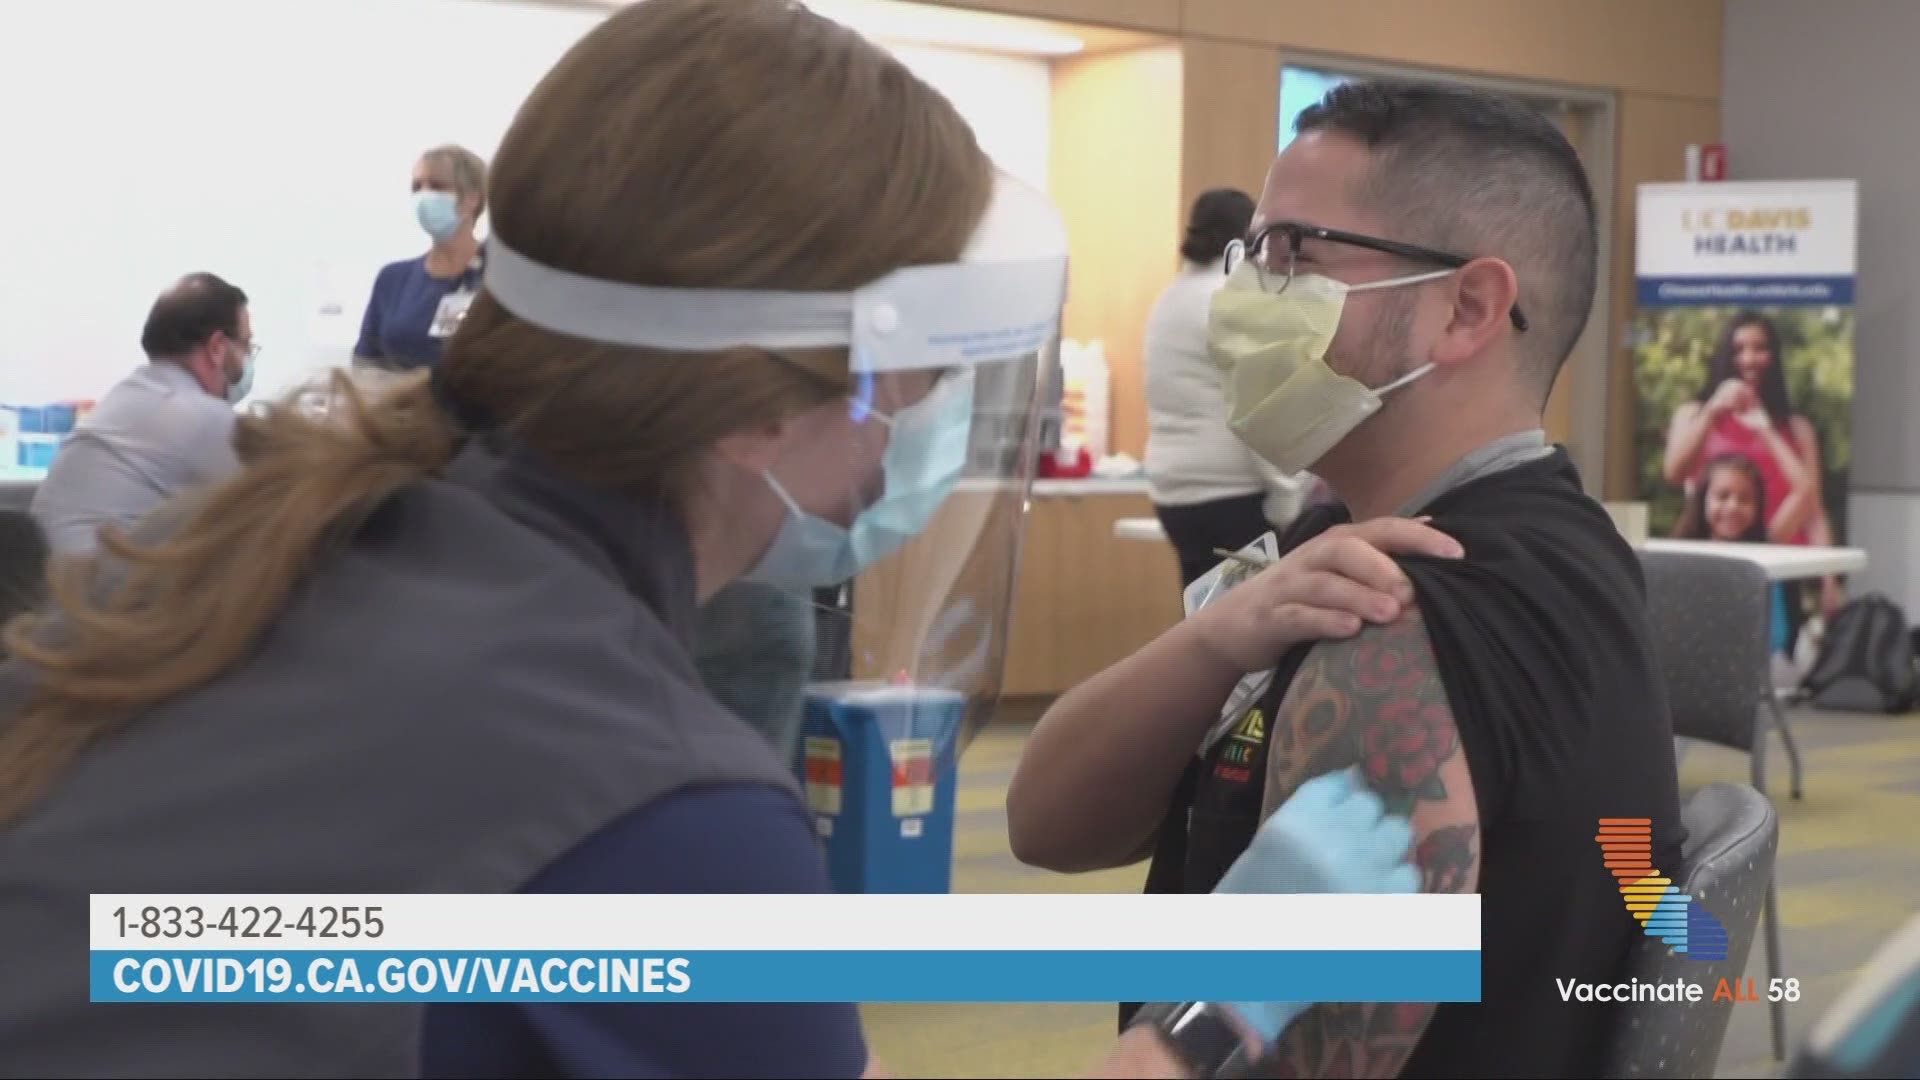 An update on the pace of vaccinations, when it'll be your turn and other COVID-19 vaccine FAQs. This segment was paid for by The Center at Sierra Health Foundation.